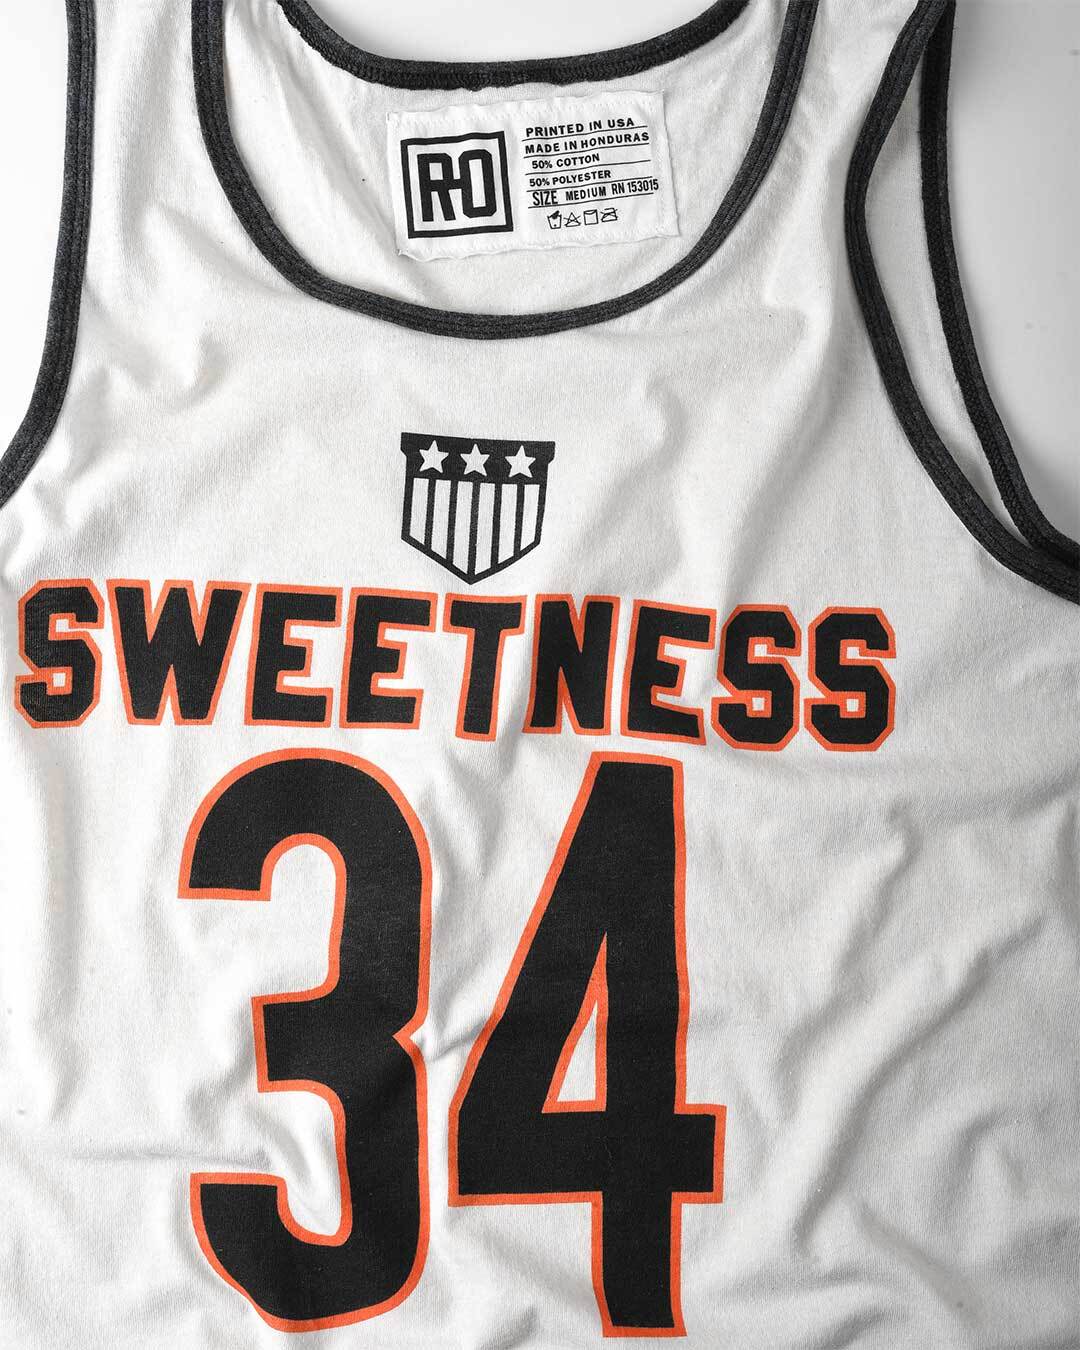 Payton Sweetness #34 Vintage White Tank - Roots of Fight